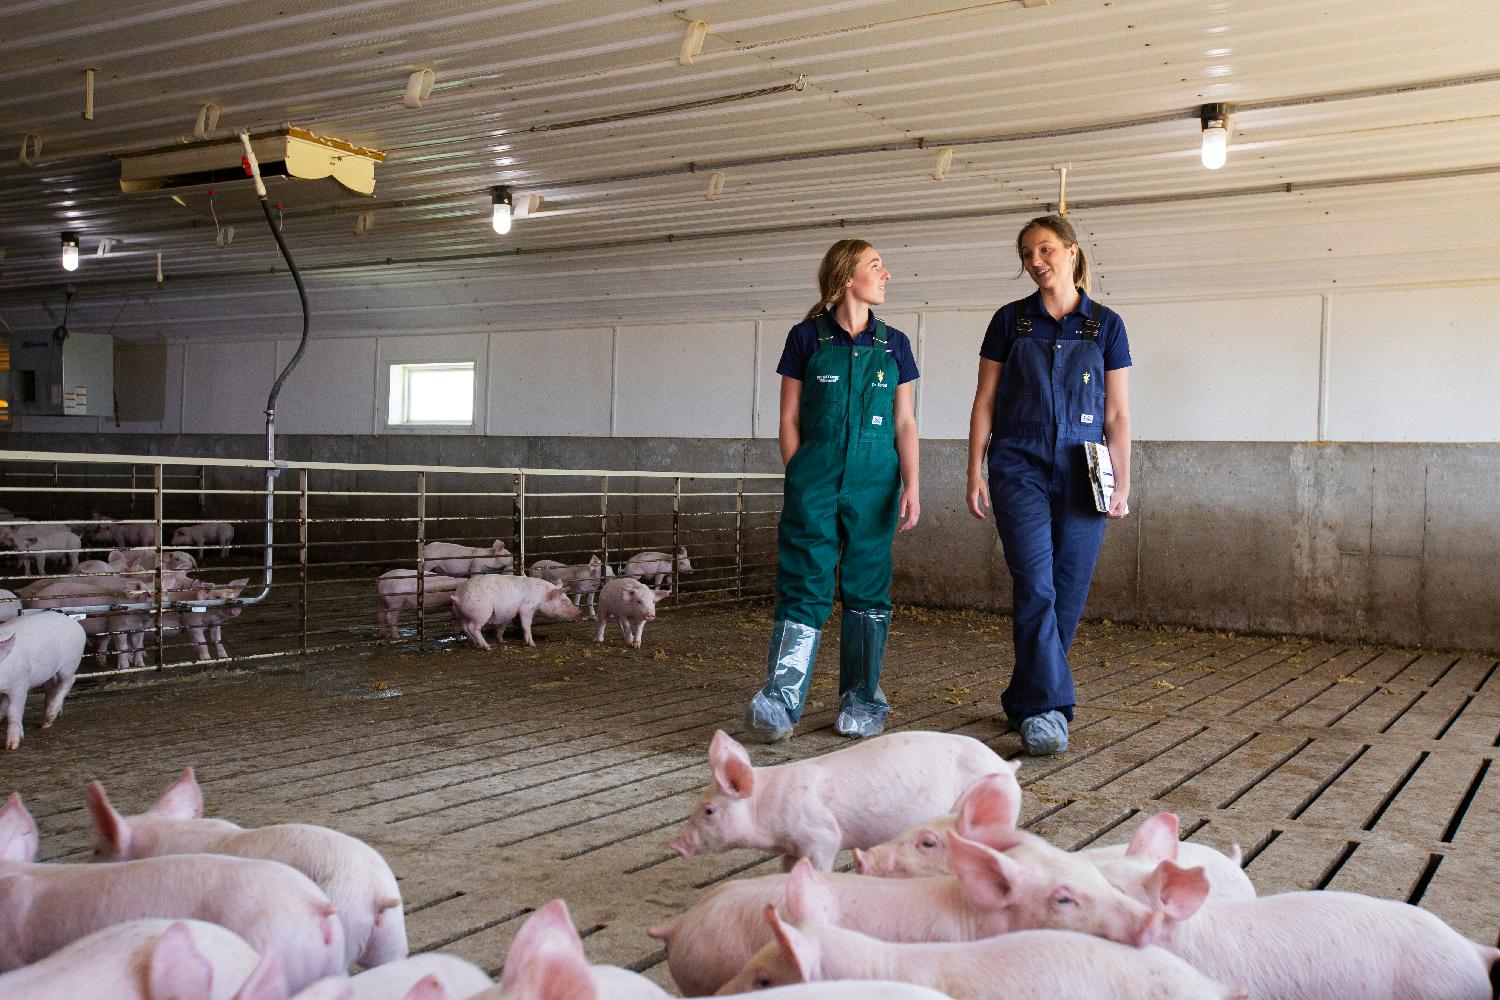 Dr. Spronk (Veterinarian) and Erin Little (Research Project Lead & Statistician) care for a group of healthy pigs.